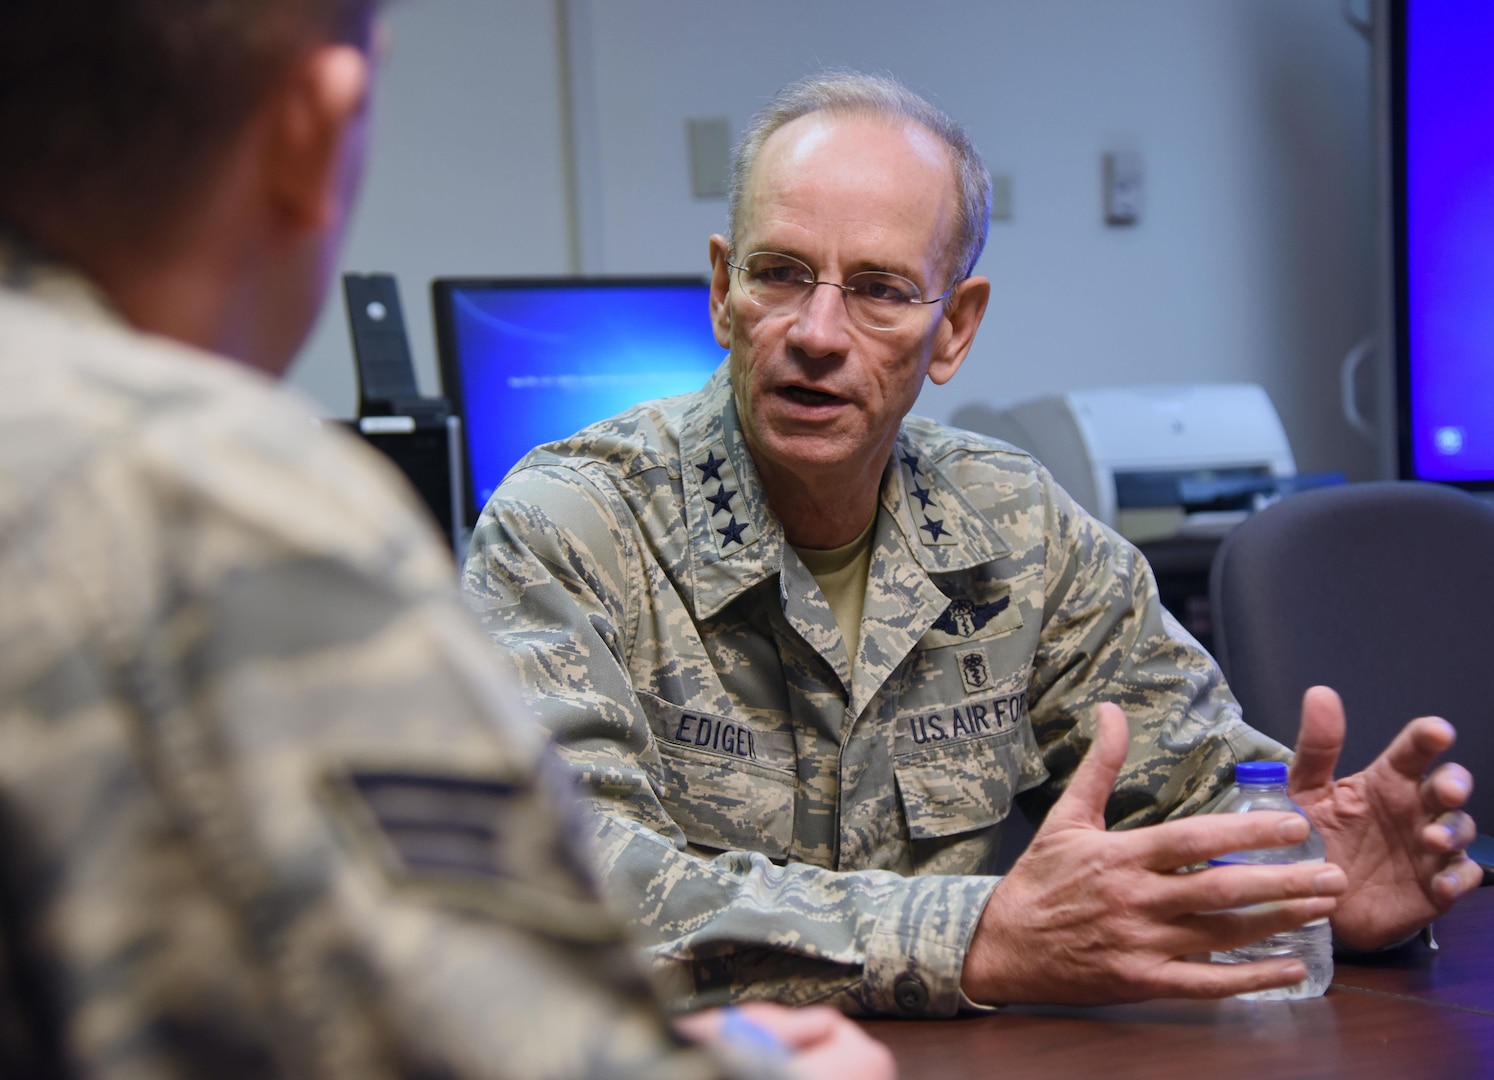 Lt. Gen. Mark Ediger, Air Force Surgeon General, speaks with Airmen during a visit to the Clinical Research Lab, Oct. 17, 2017, on Keesler Air Force Base, Mississippi. Ediger retires from the Air Force, June 1, 2018.